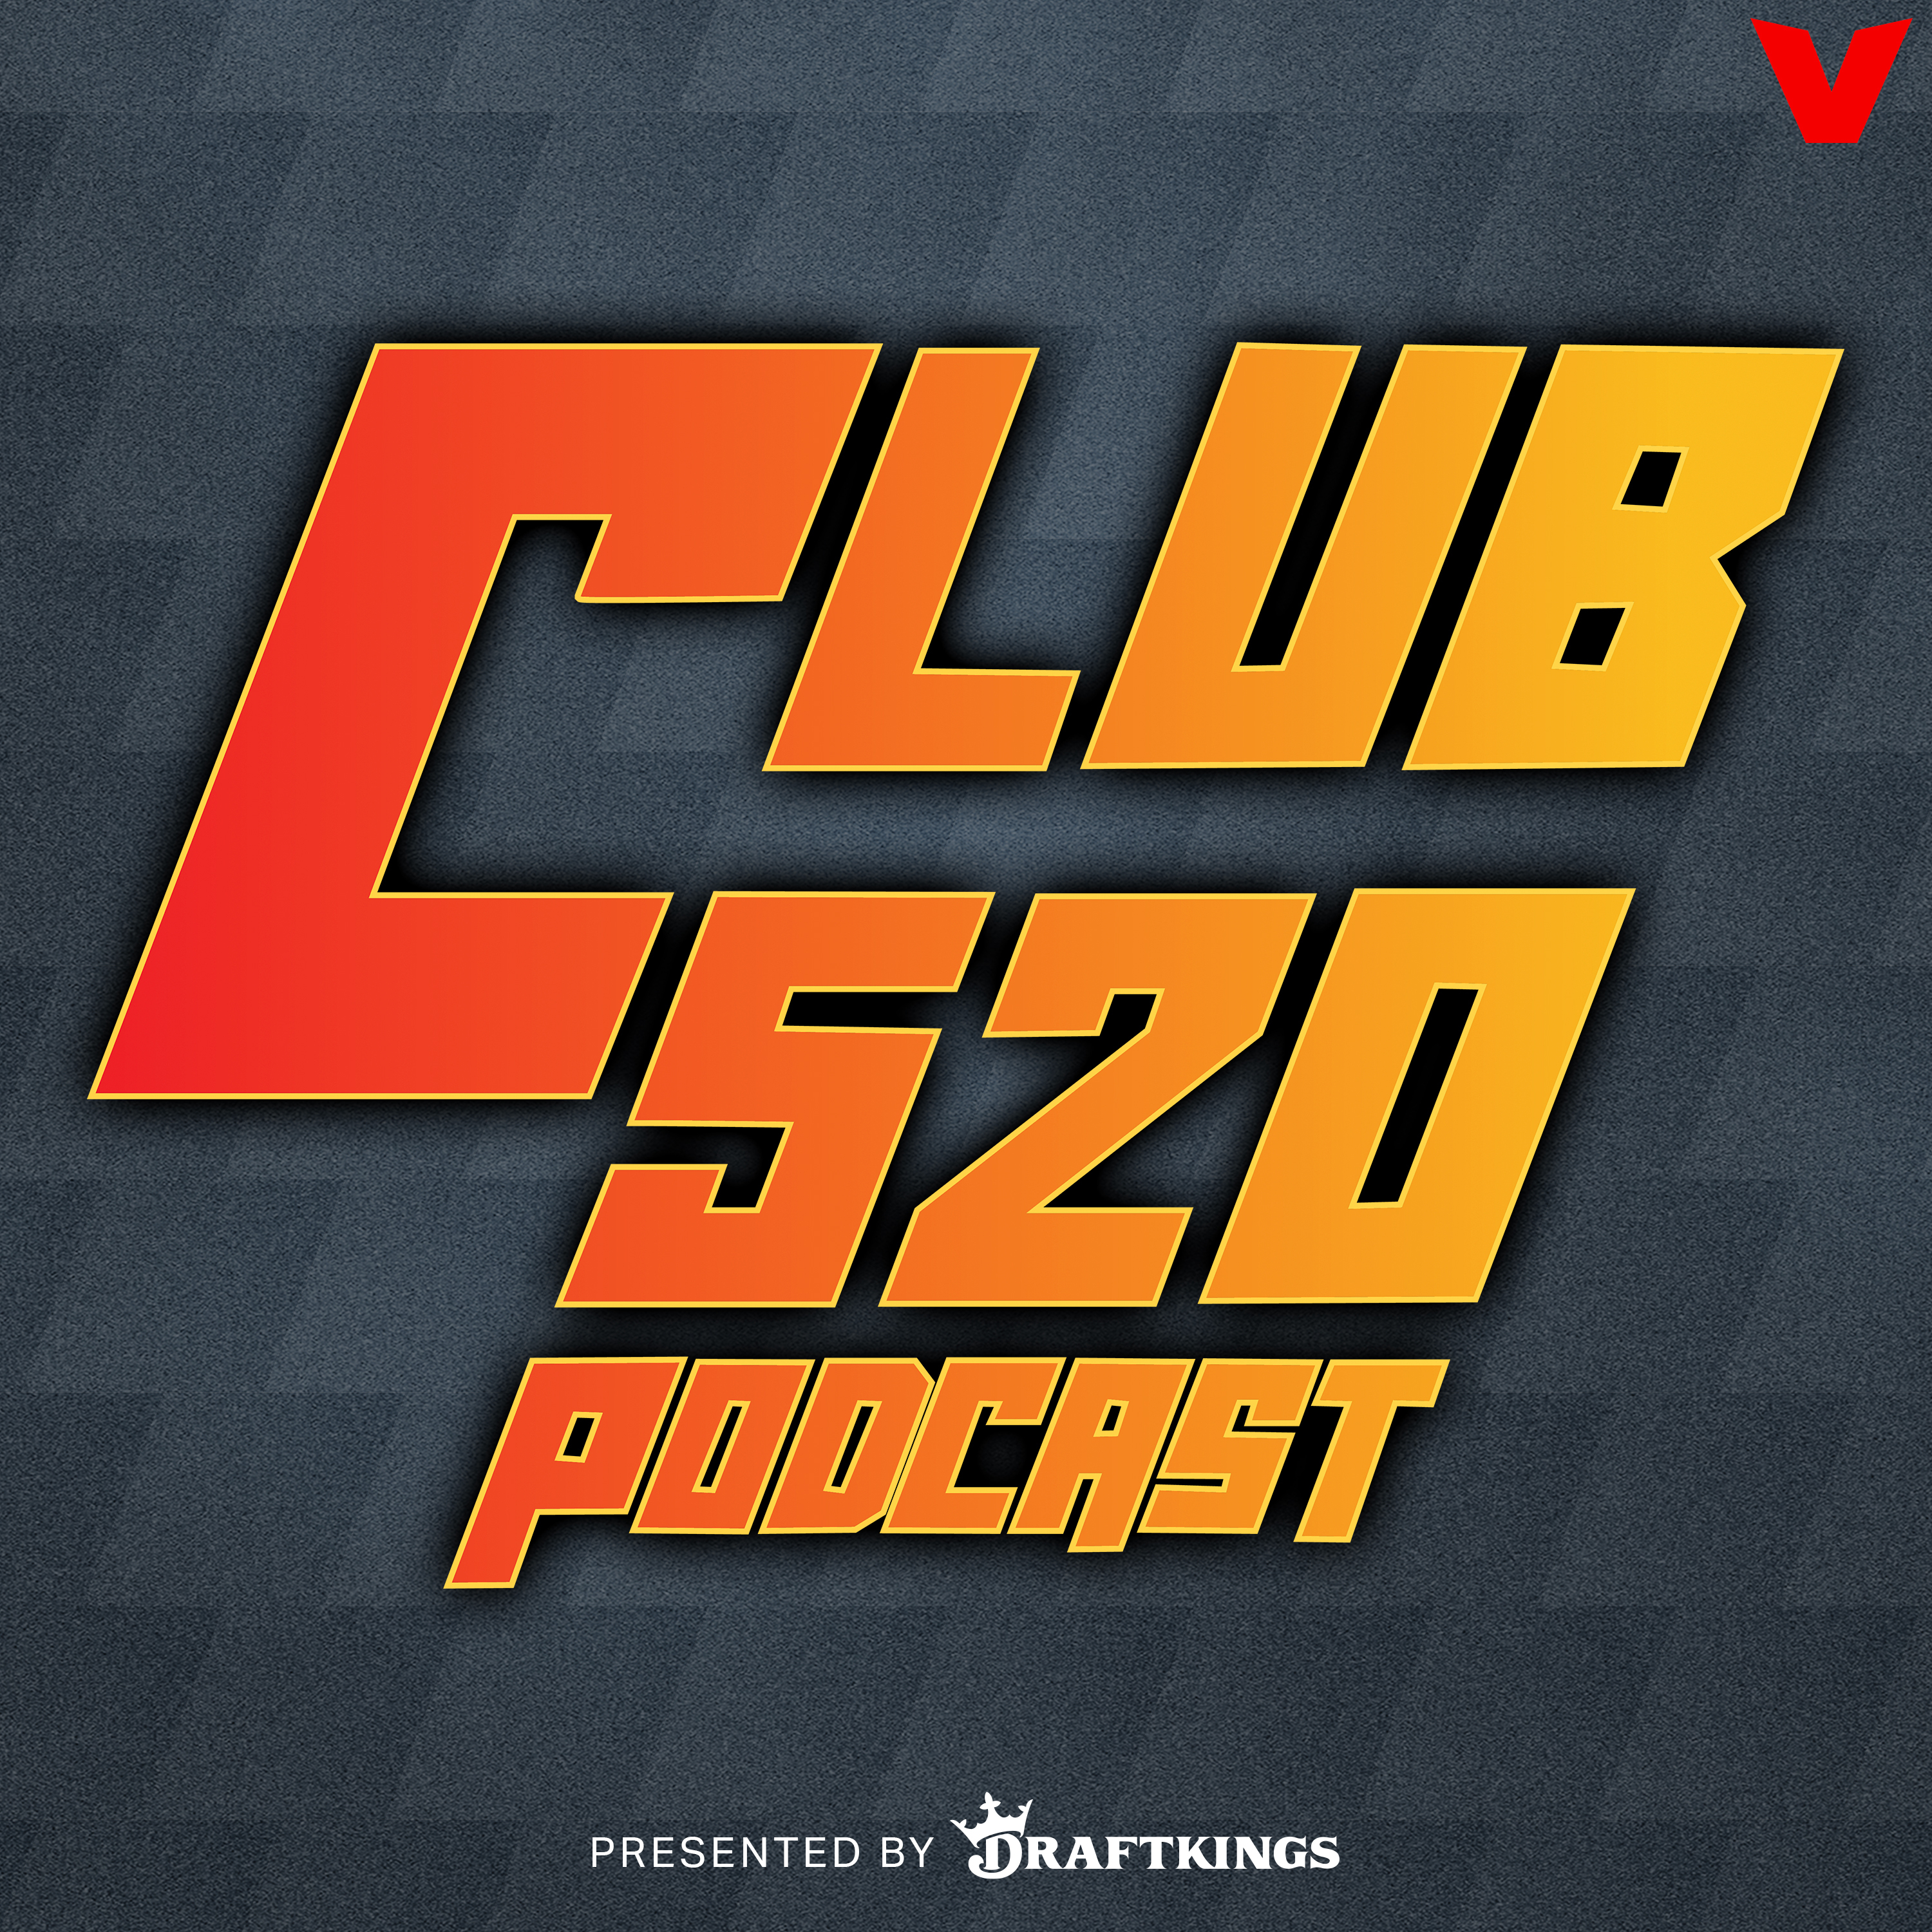 Club 520 - Michael Blackson got PULLED OVER w/ Kevin Hart, meeting Ice Cube, Embiid & 76ers by iHeartPodcasts and The Volume